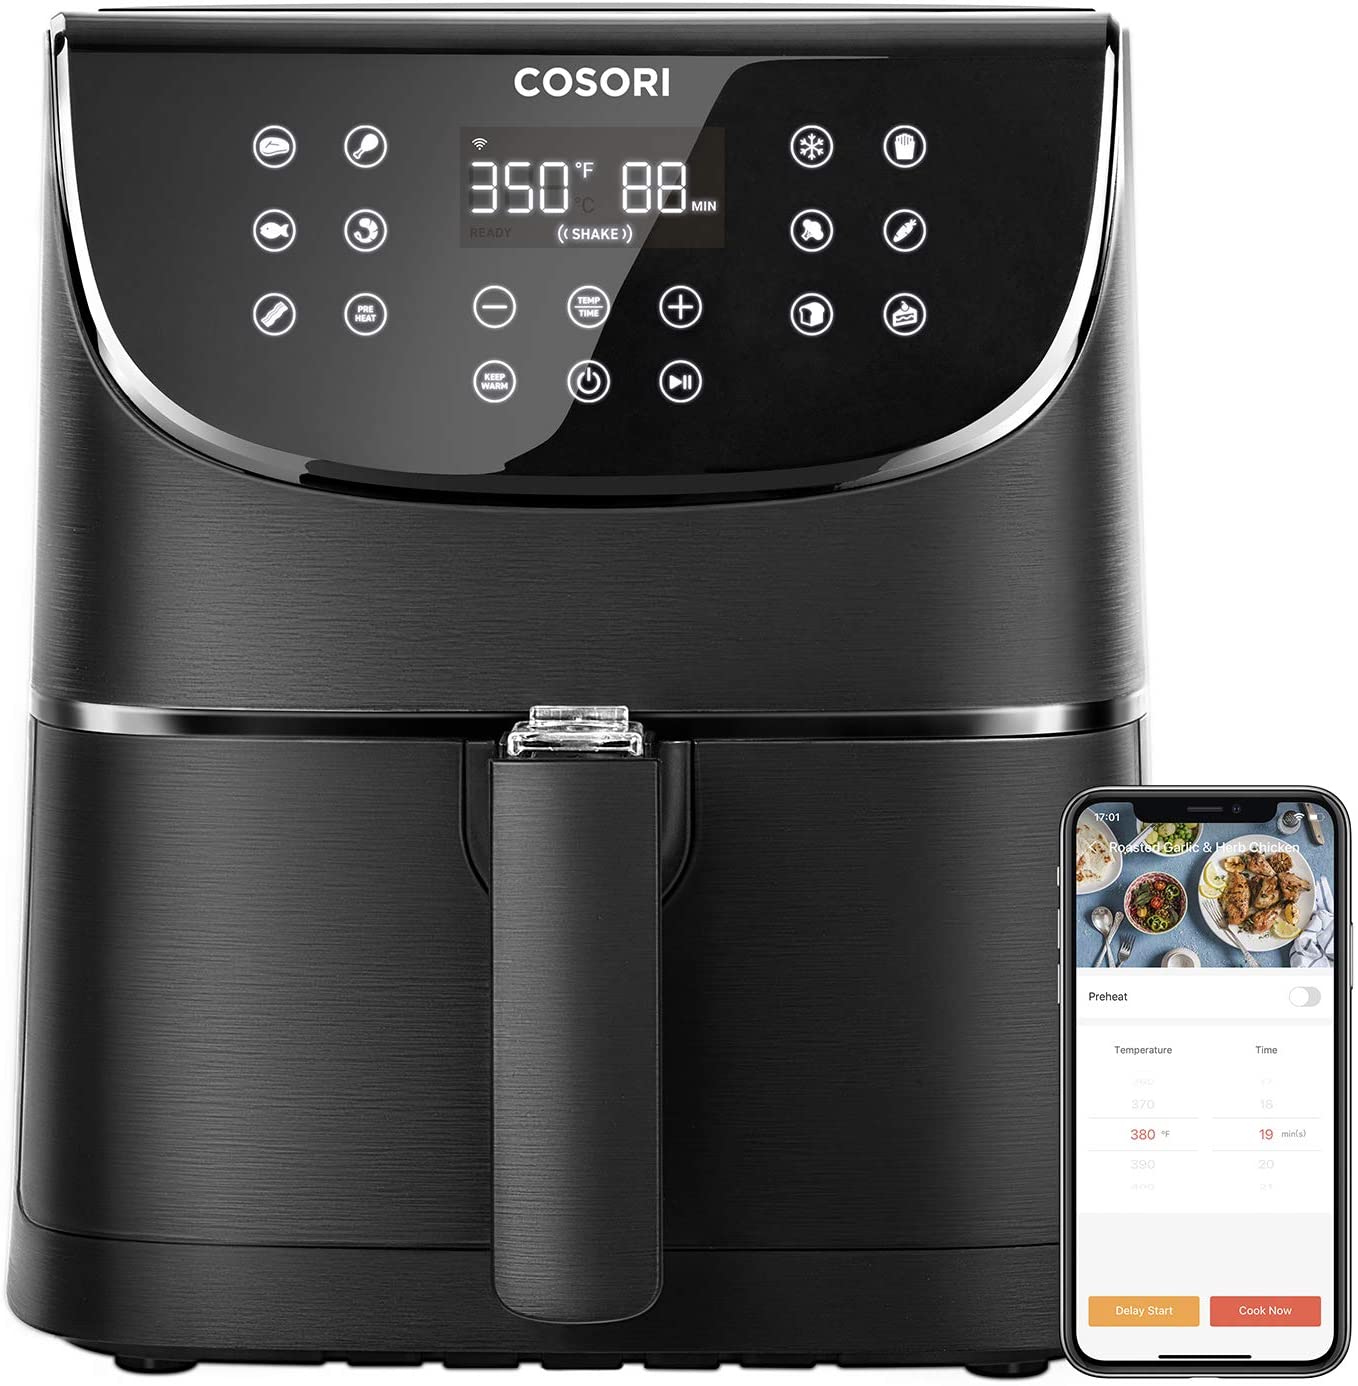 COSORI Smart WiFi Air Fryer 5.8QT(100 Recipes), Digital Touchscreen with 11 Cooking Presets for Air Frying, Roasting & Keep Warm ,Preheat & Shake Remind, Works with Alexa & Google Assistant,1700W